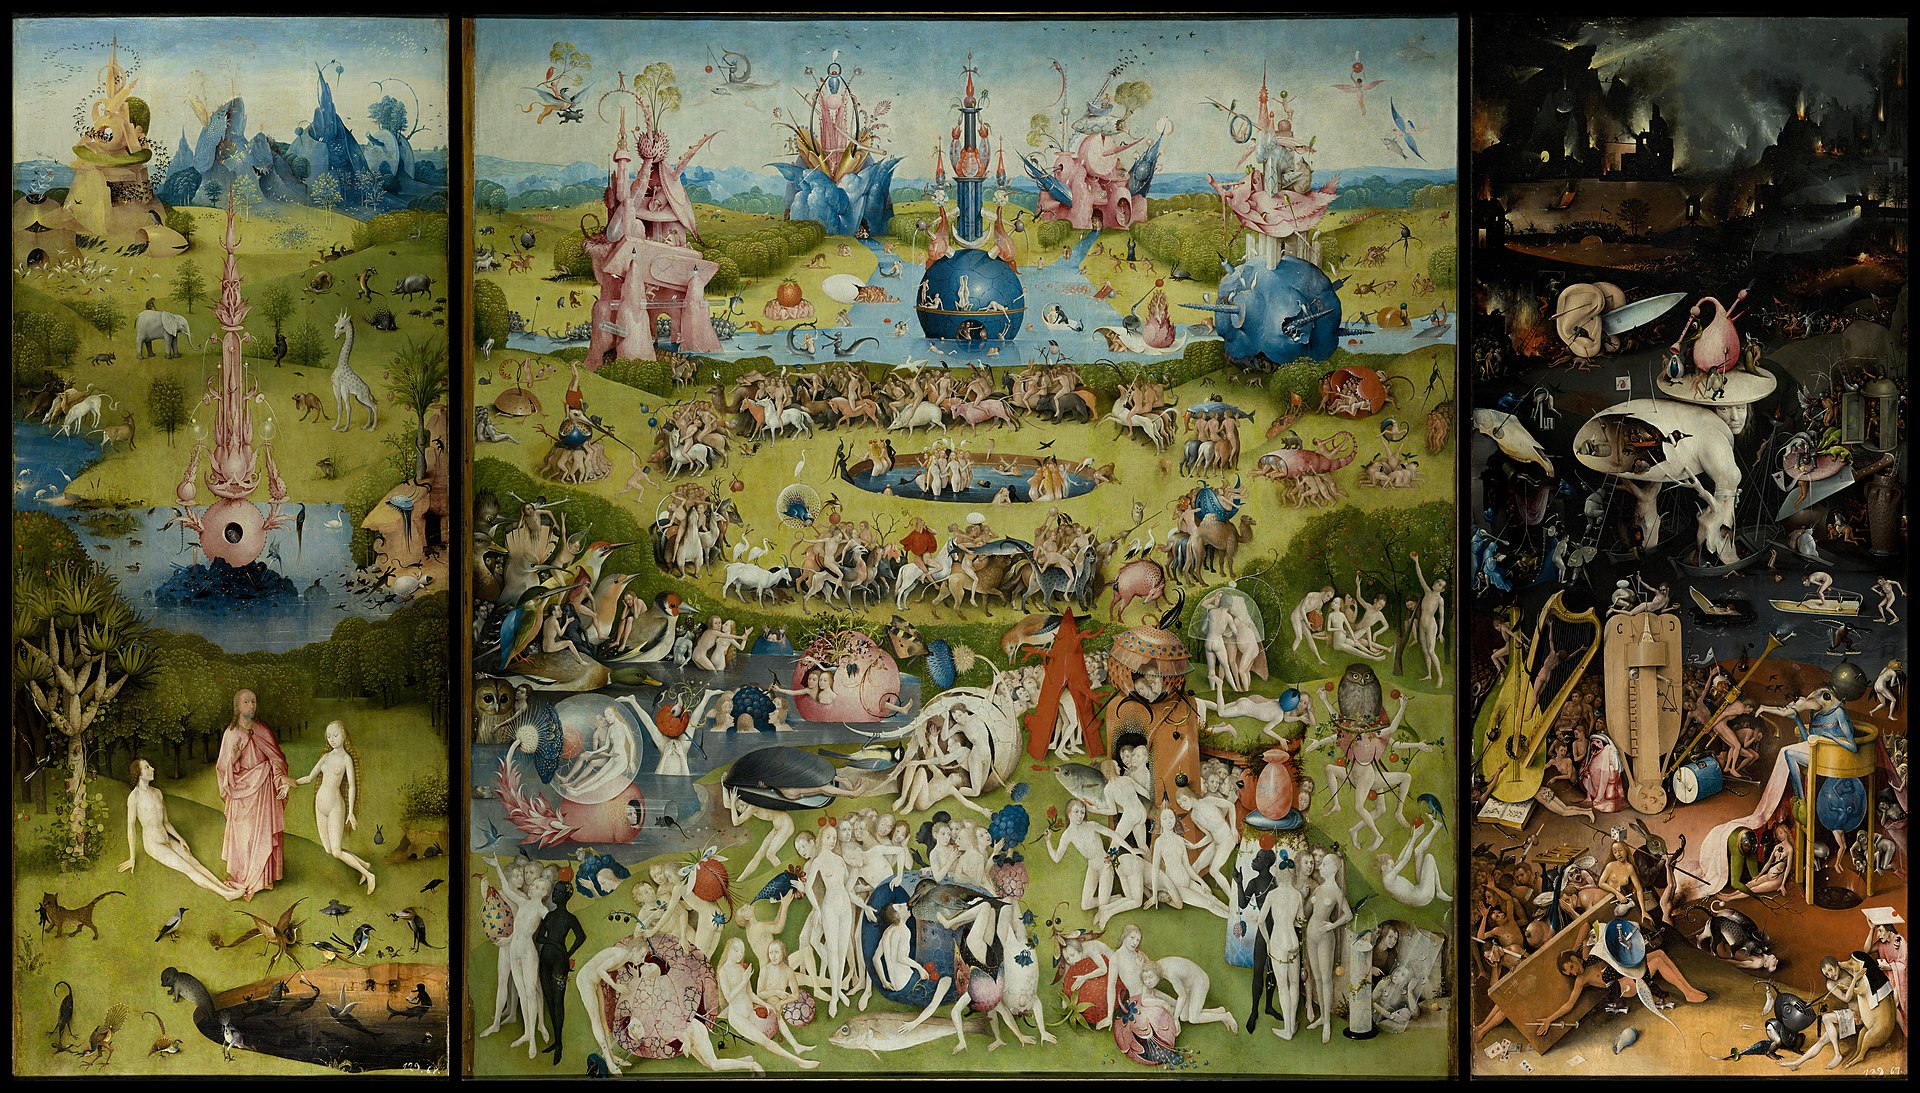 1920px-The_Garden_of_Earthly_Delights_by_Bosch_High_Resolution.jpg